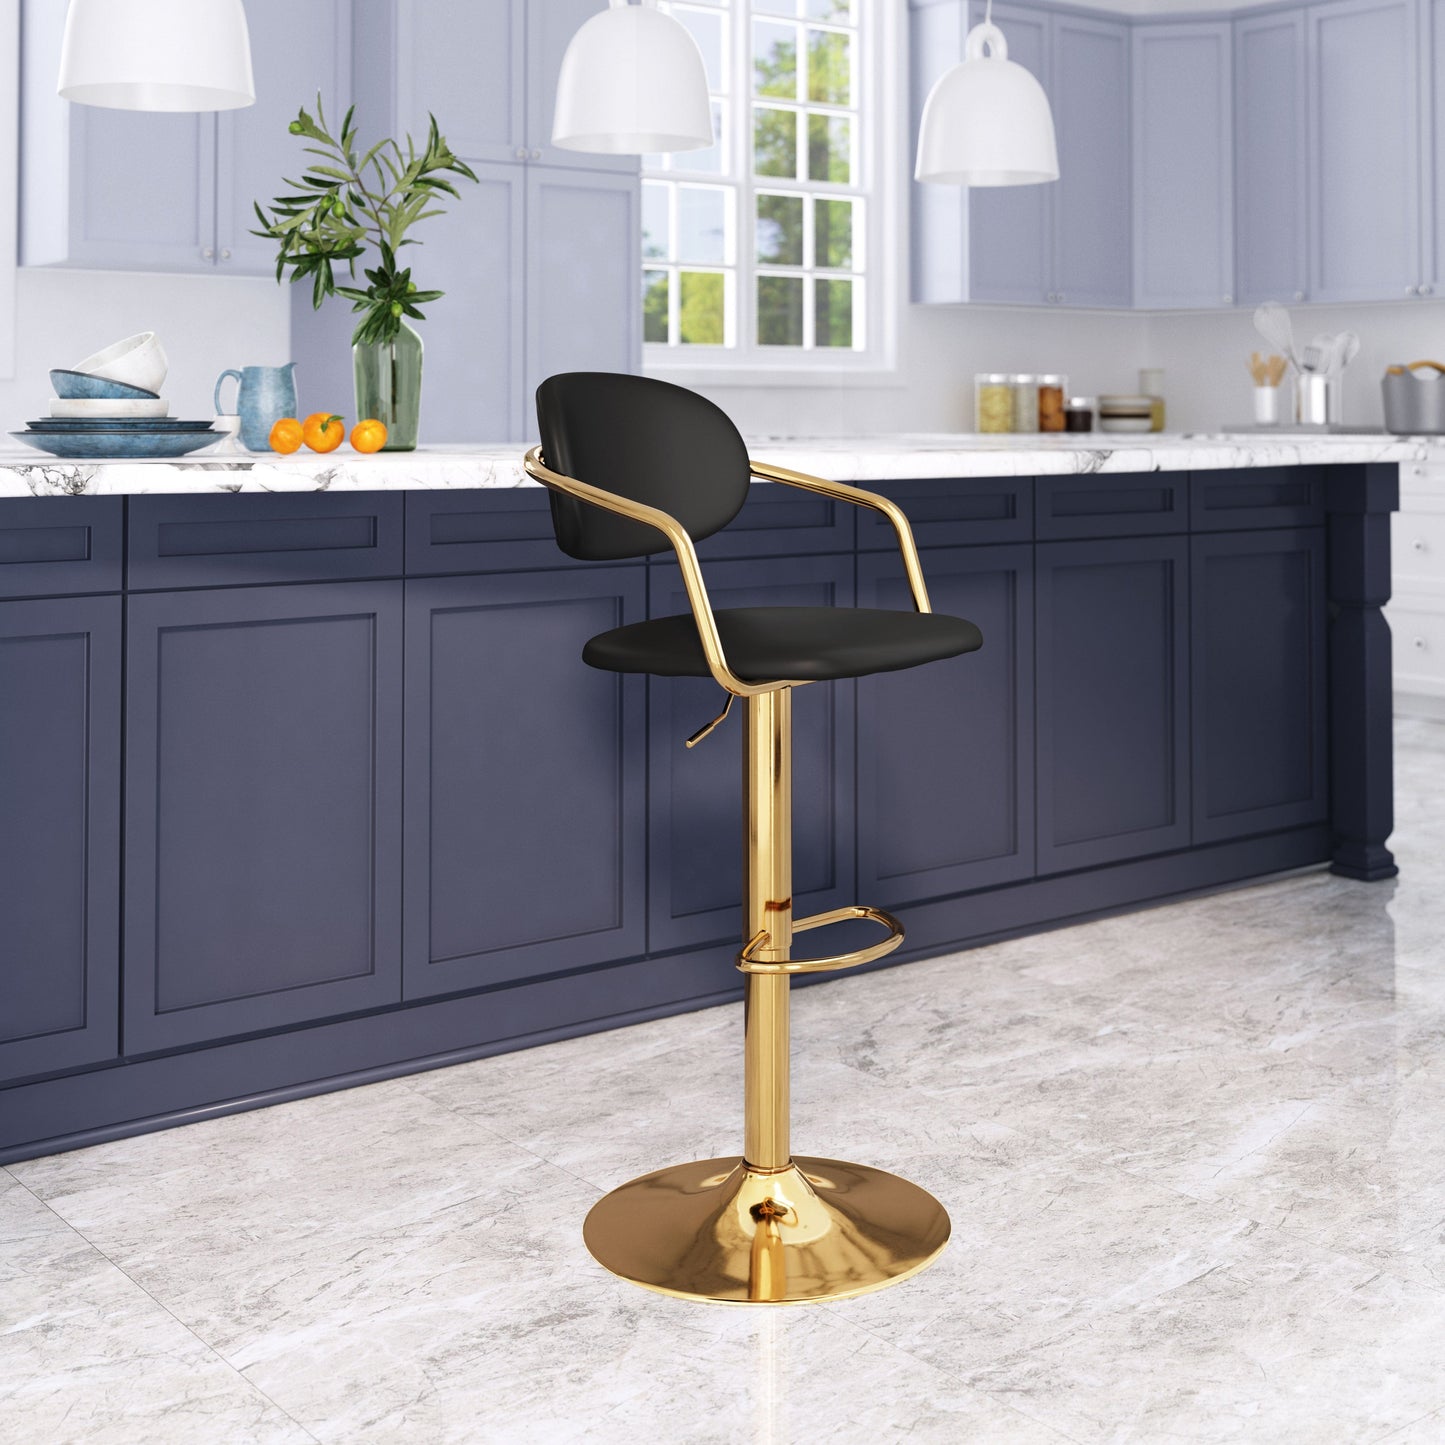 Gusto gold & black counter chair